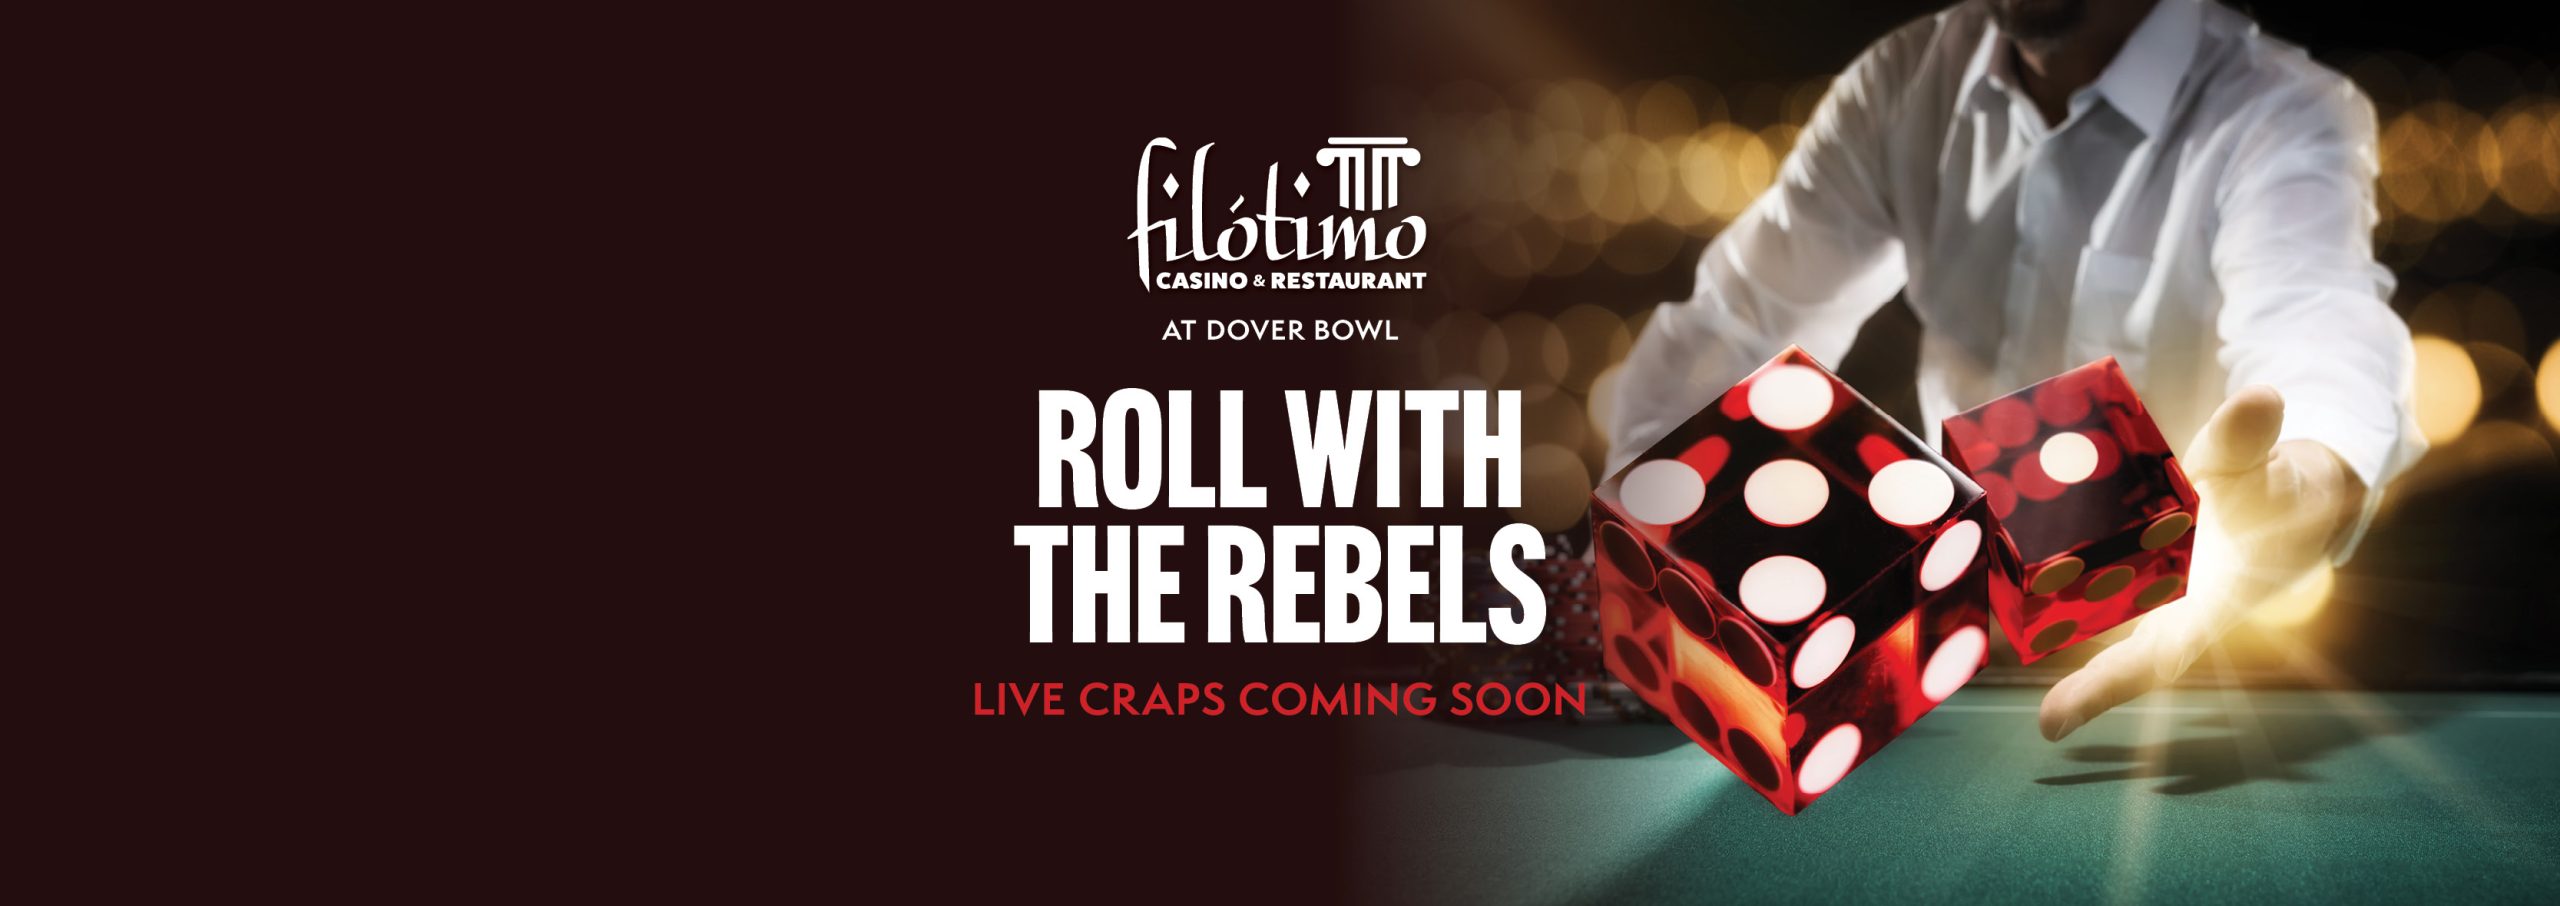 Roll with the rebels. Live craps coming soon